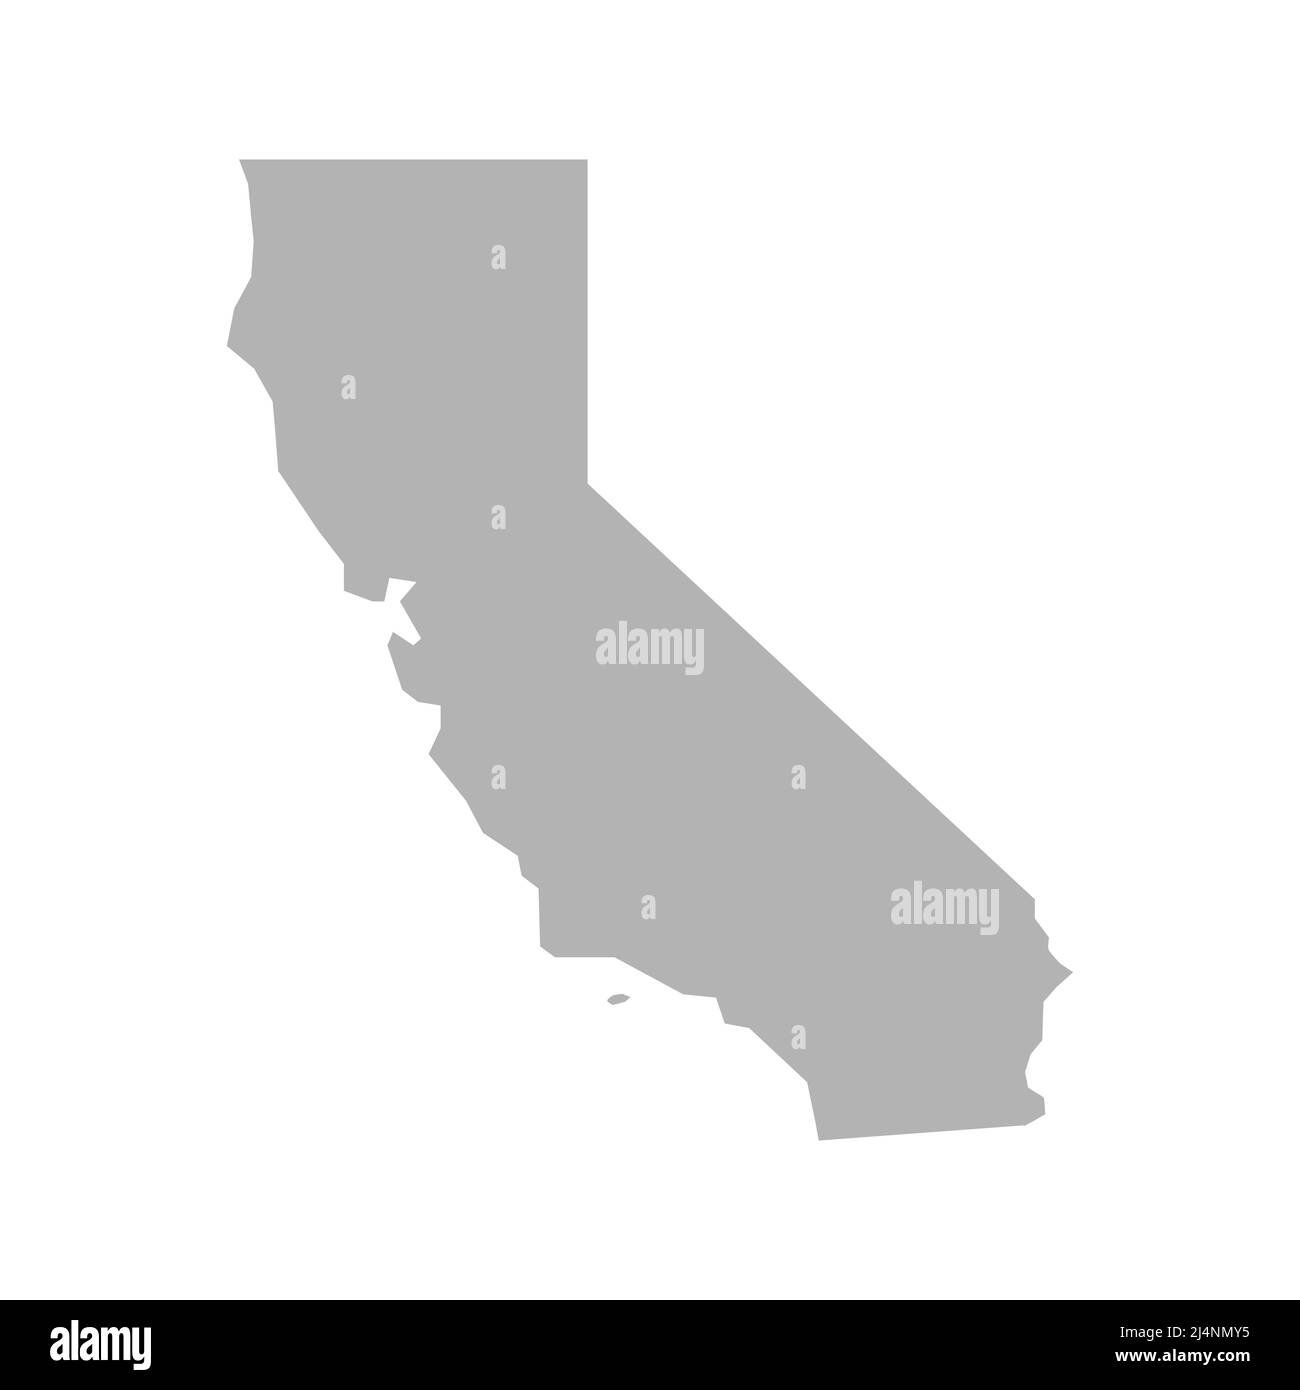 California map vector icon on white background Stock Vector